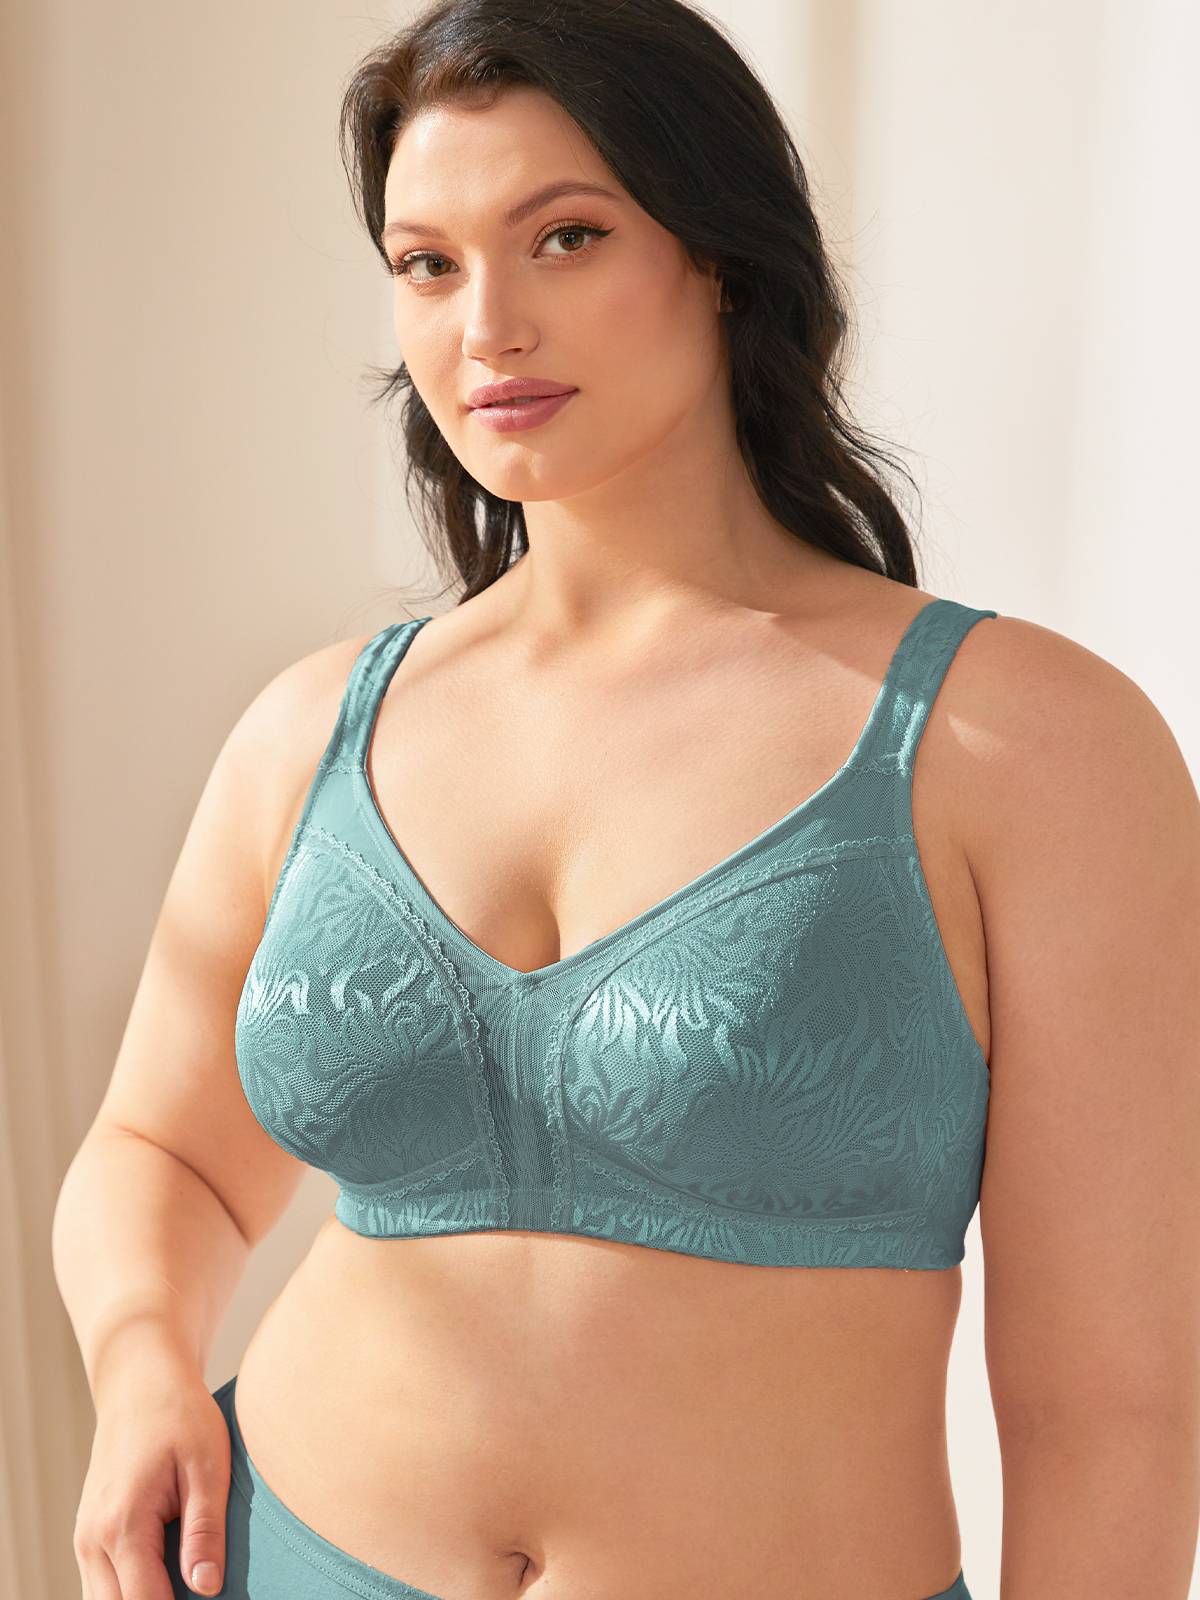  Womens Plus Size Bras Minimizer Underwire Full Coverage  Unlined Seamless Cup Light Green Heather 42B